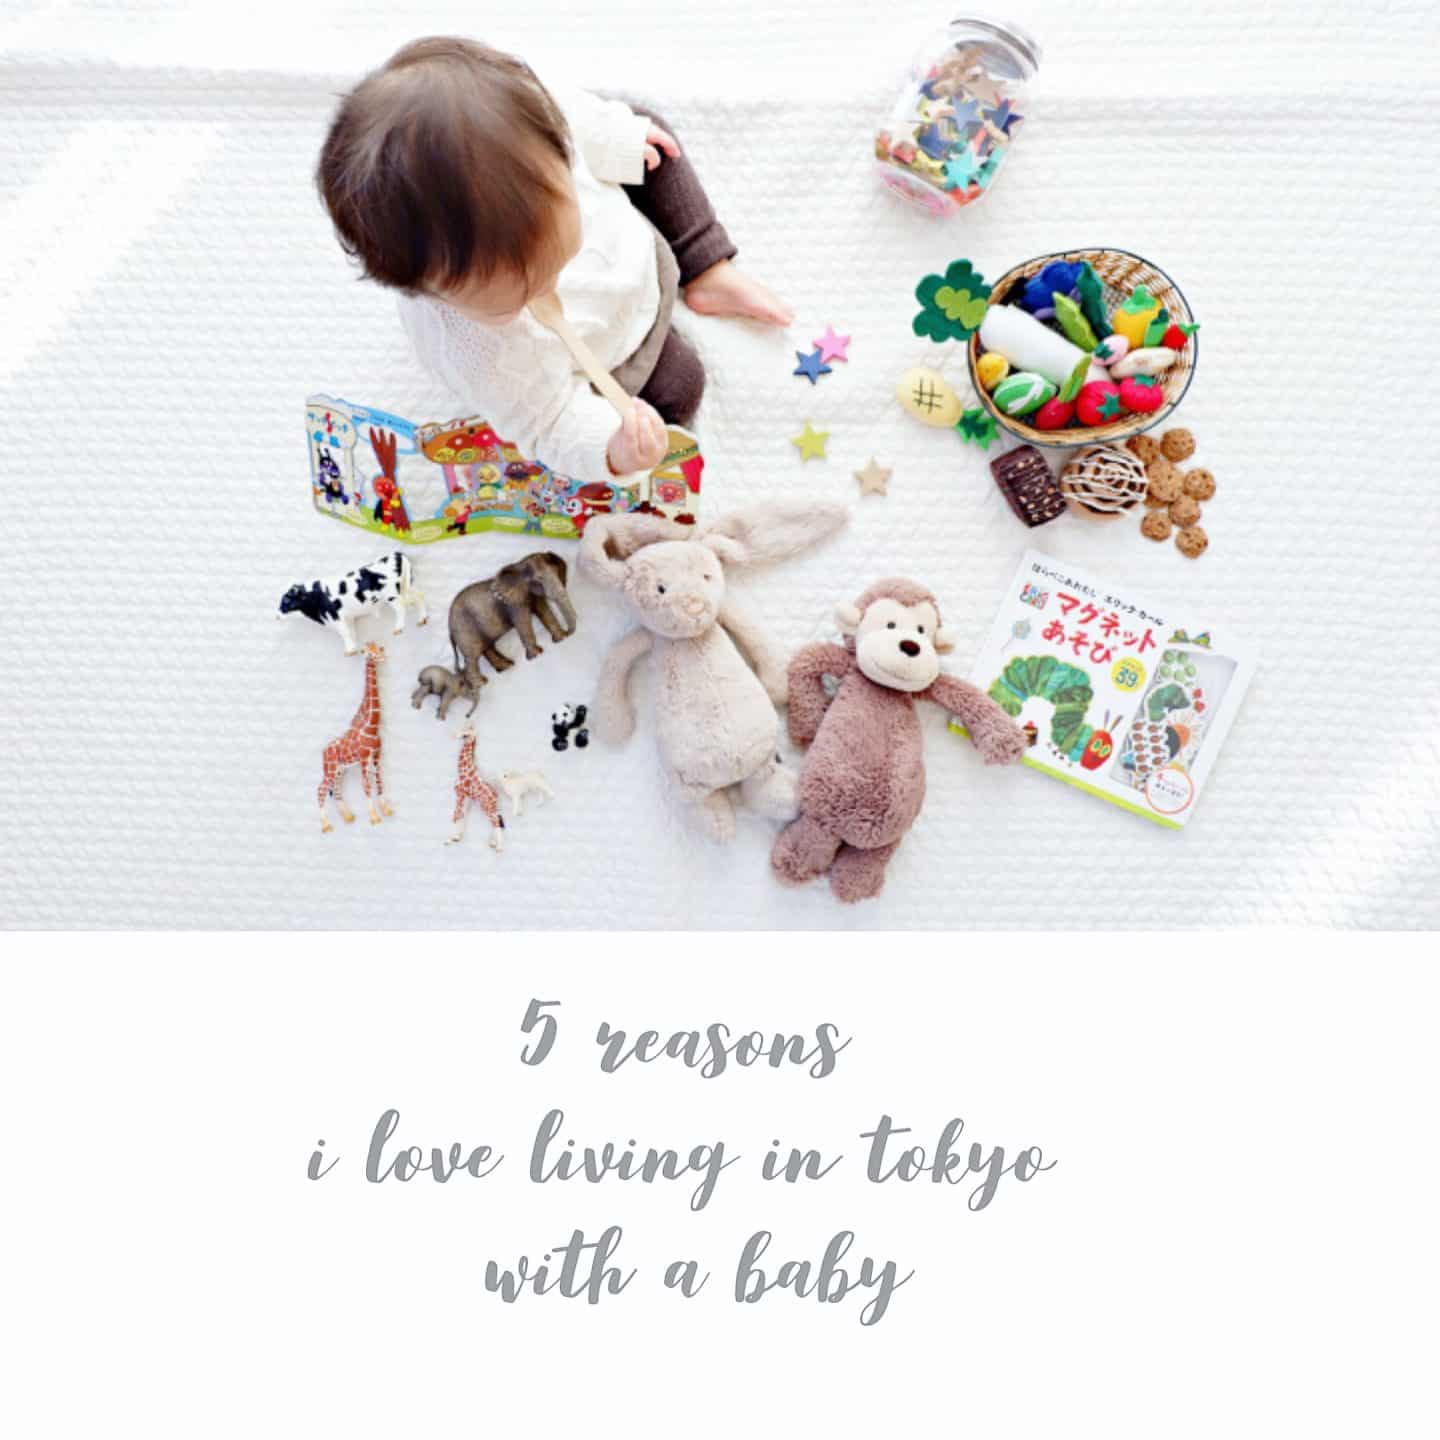 5 REASONS I LOVE LIVING IN TOKYO WITH A BABY ( A GUEST POST BY JOCELYN SAITO)